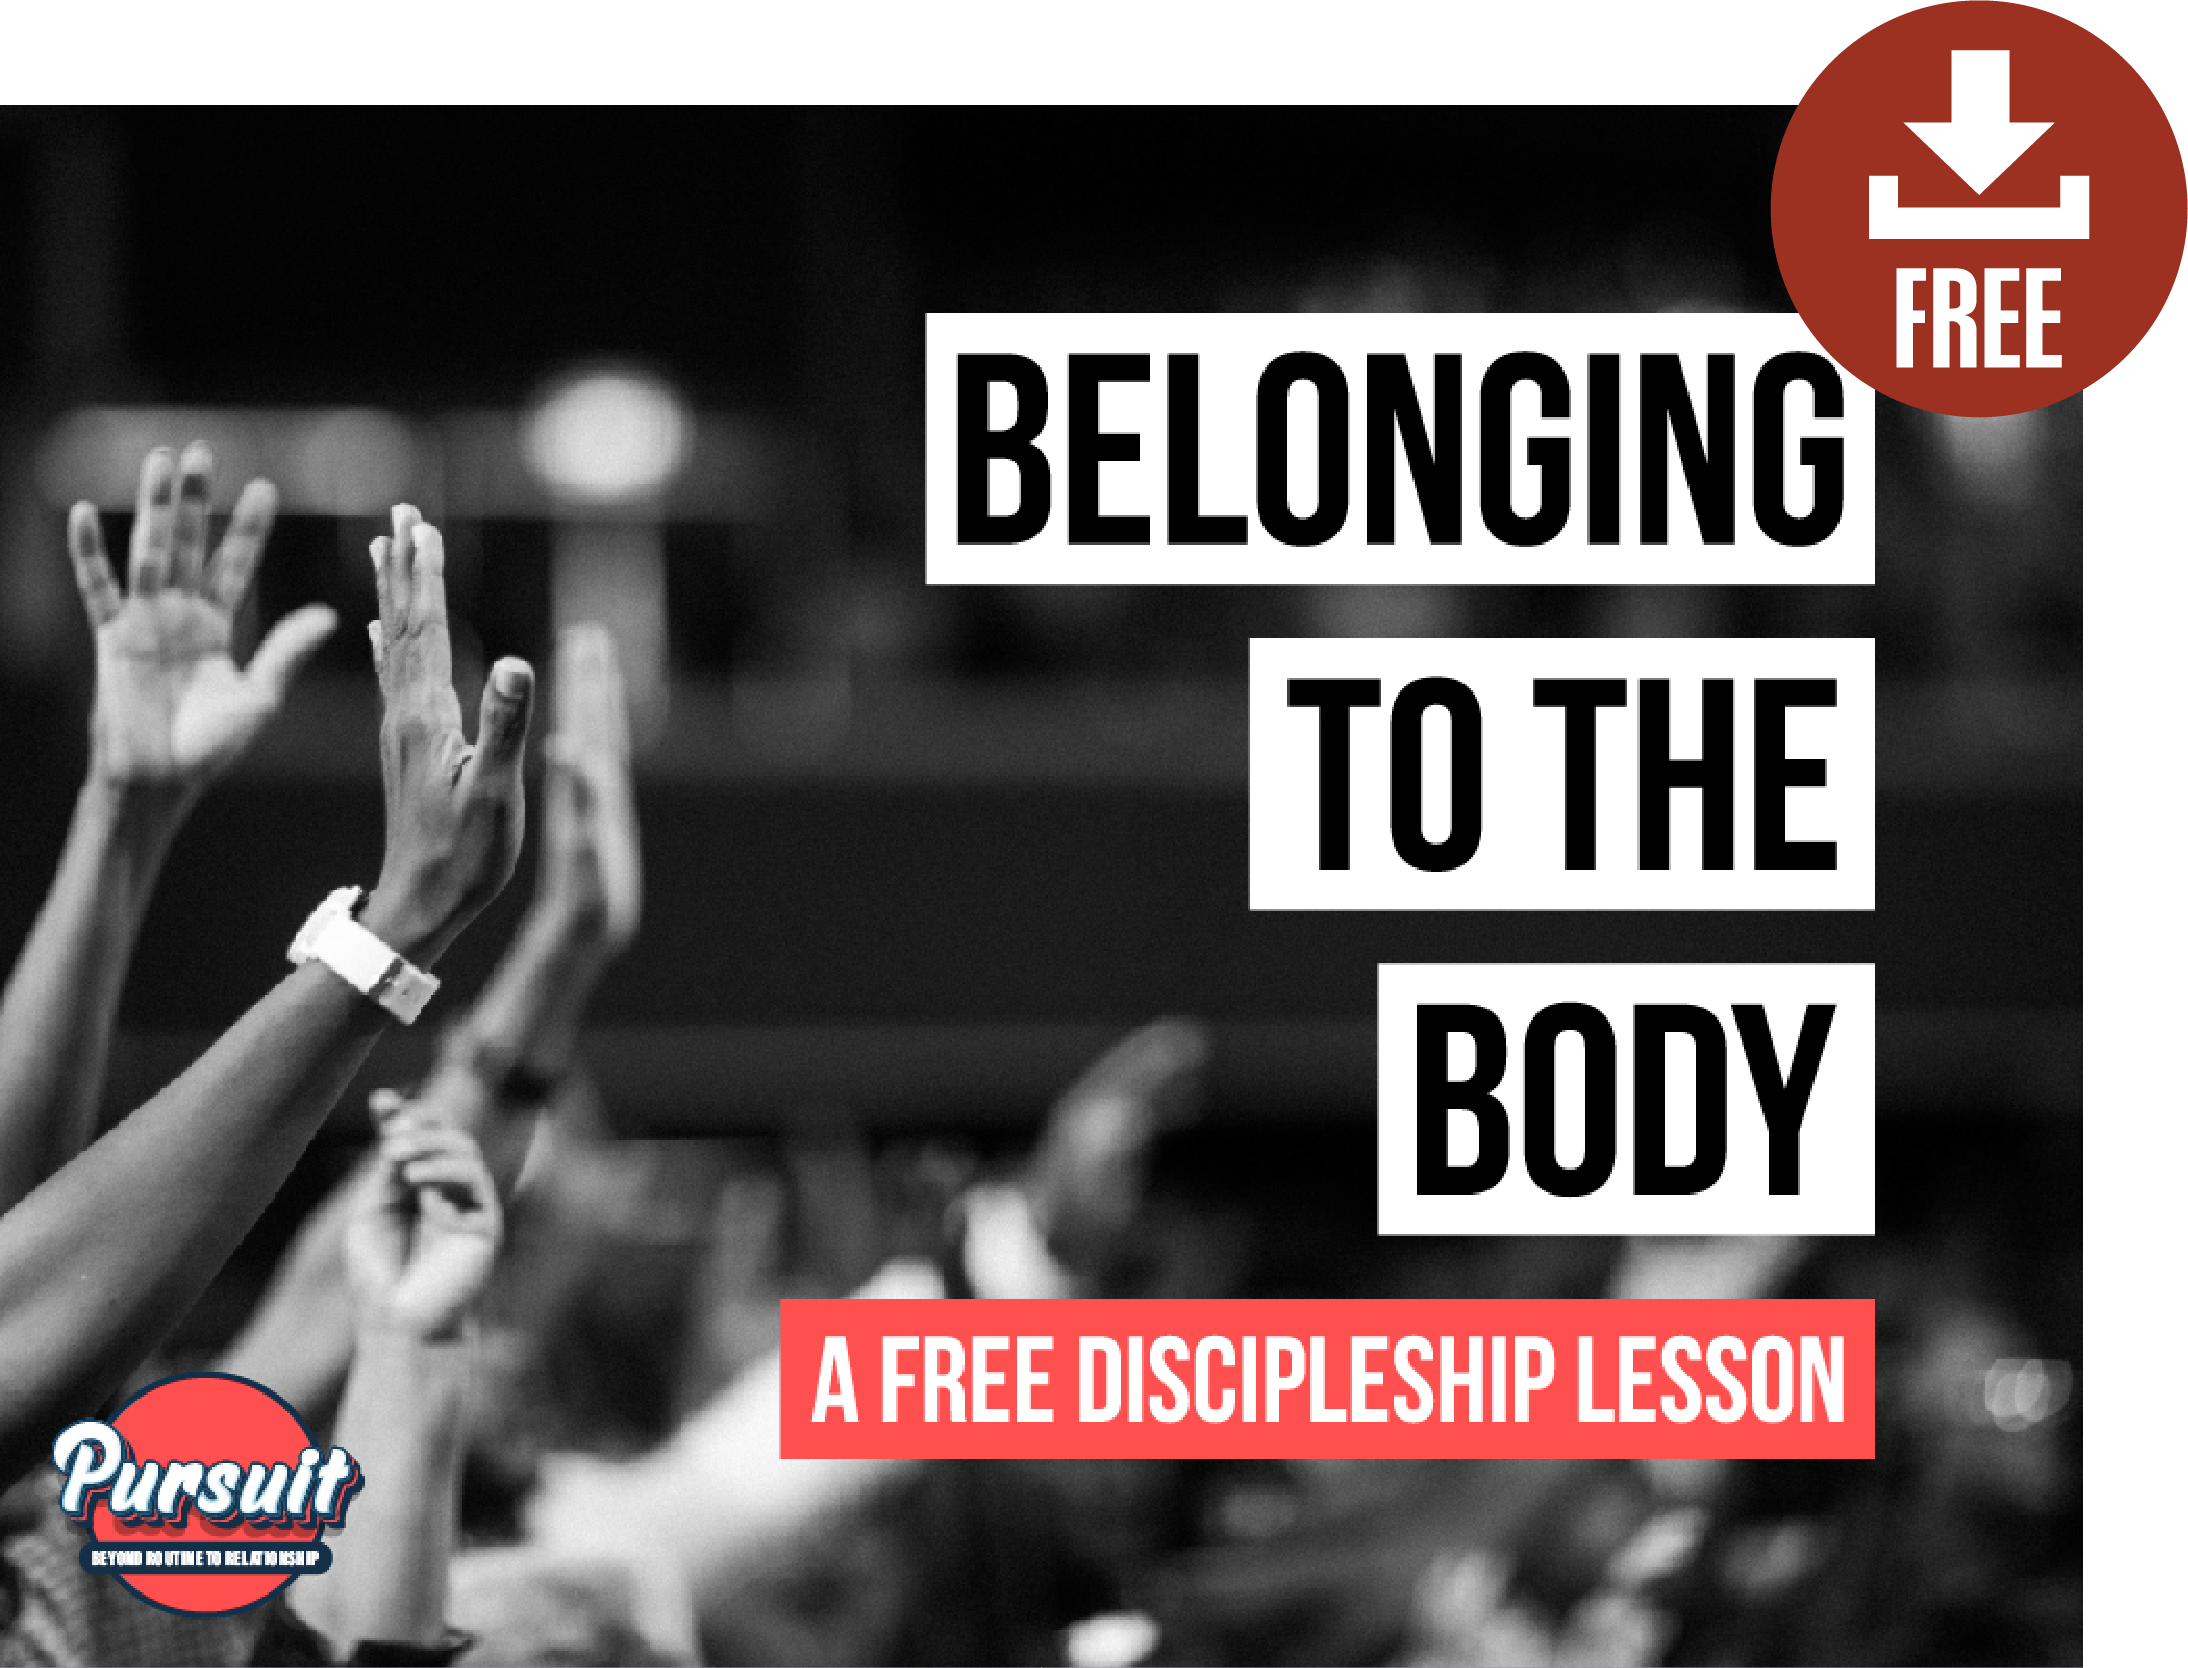 pursuit deep discipleship youth ministry free lesson belonging to the body unity racism